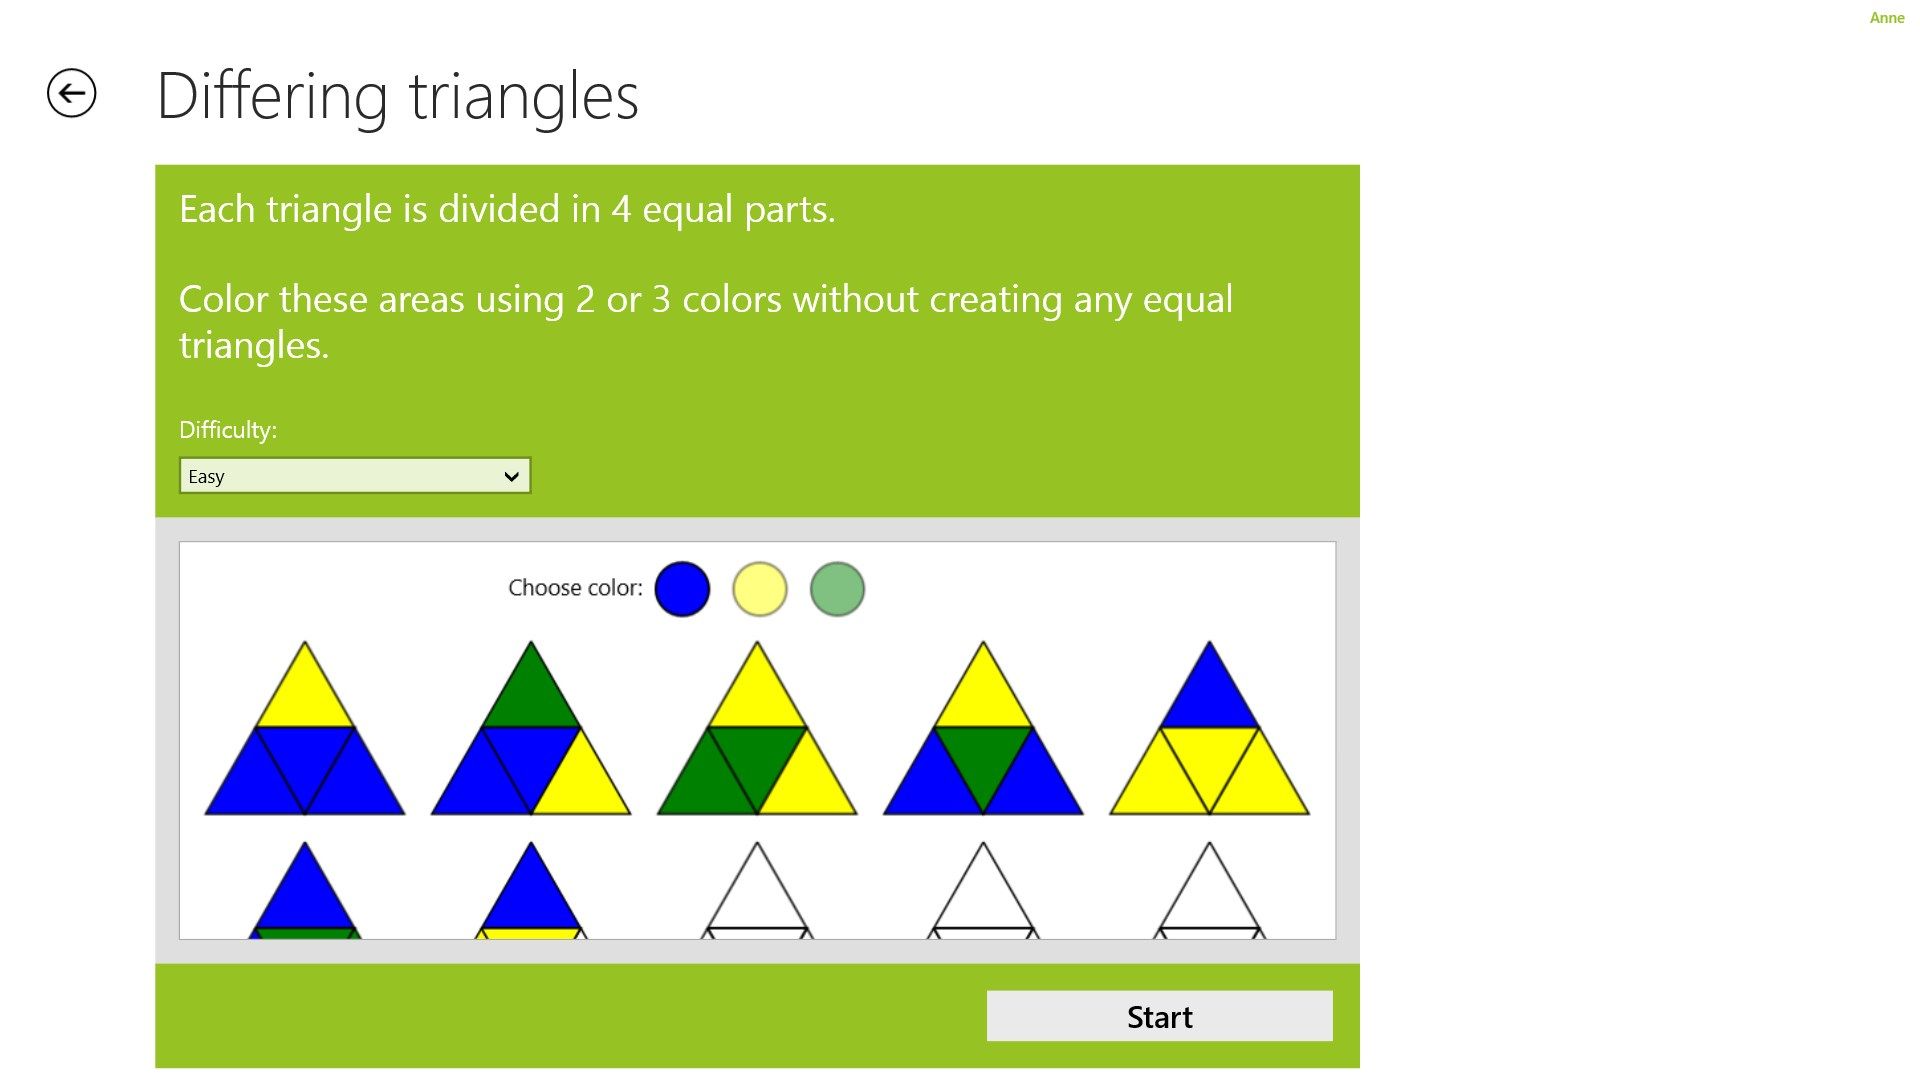 Triangles must be colored without creating any equal triangles.